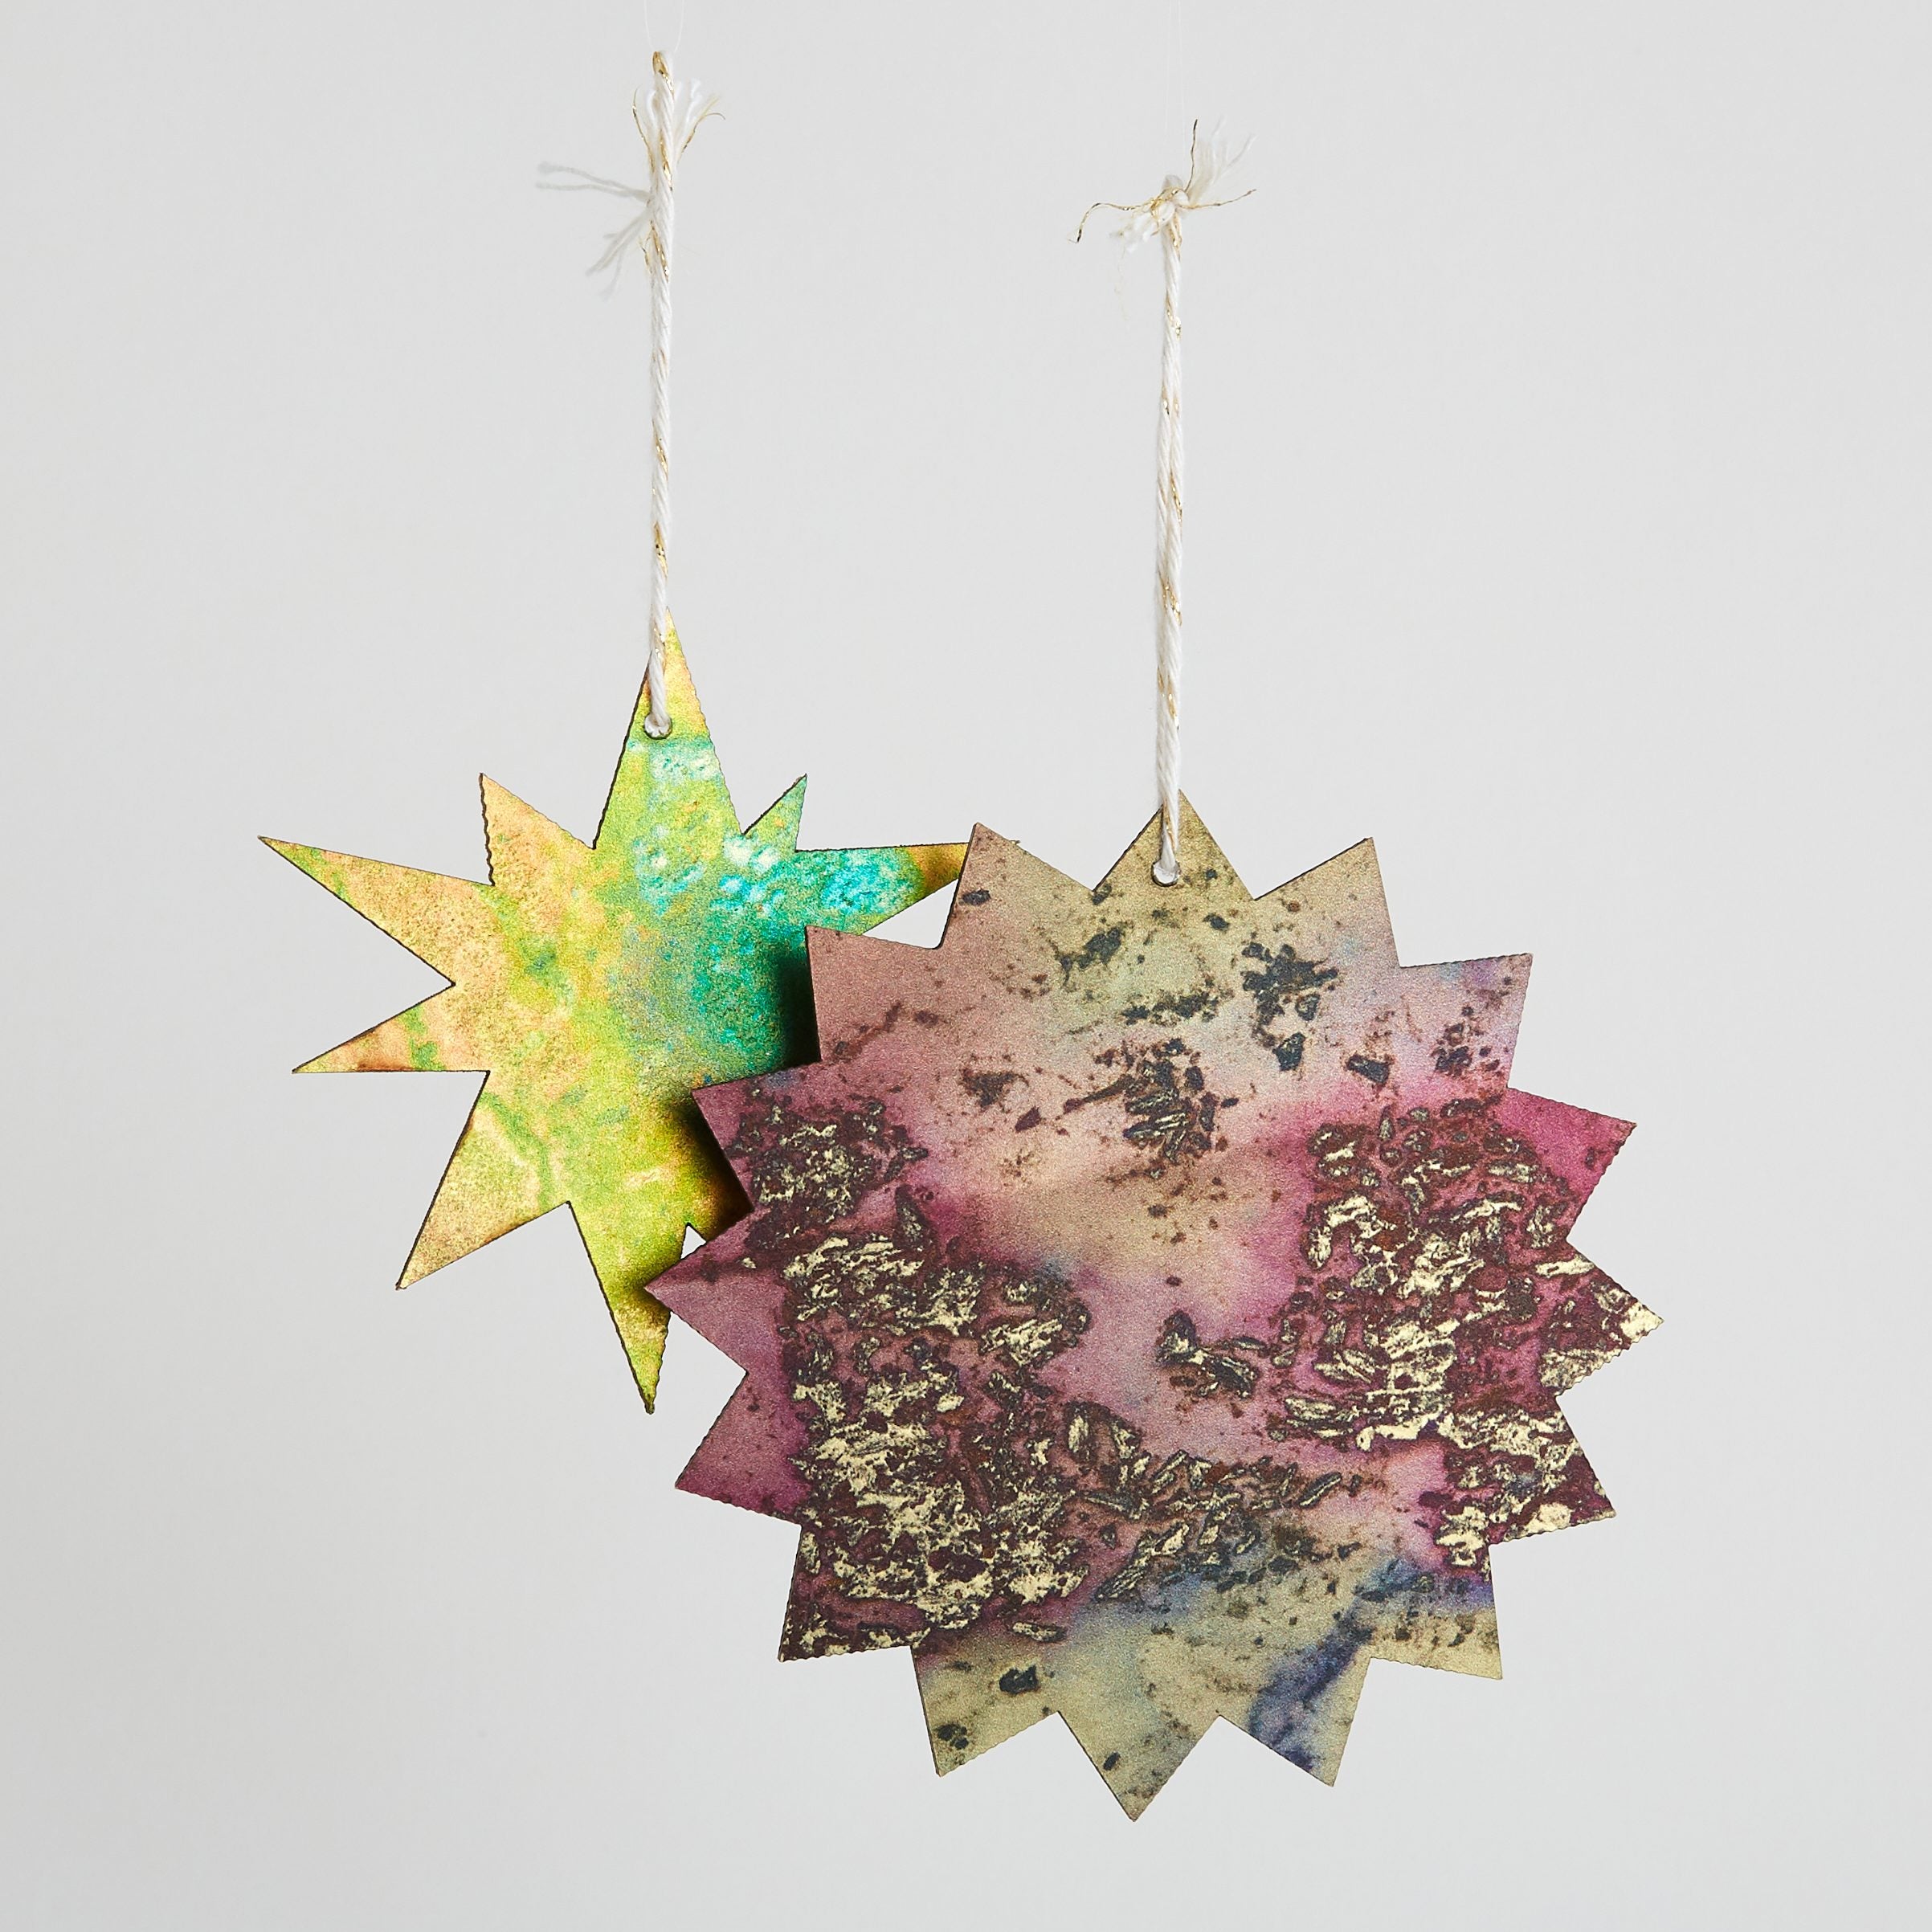 Fredericks and Mae’s Quirky Ornaments Will Make You Rethink Holiday Decor